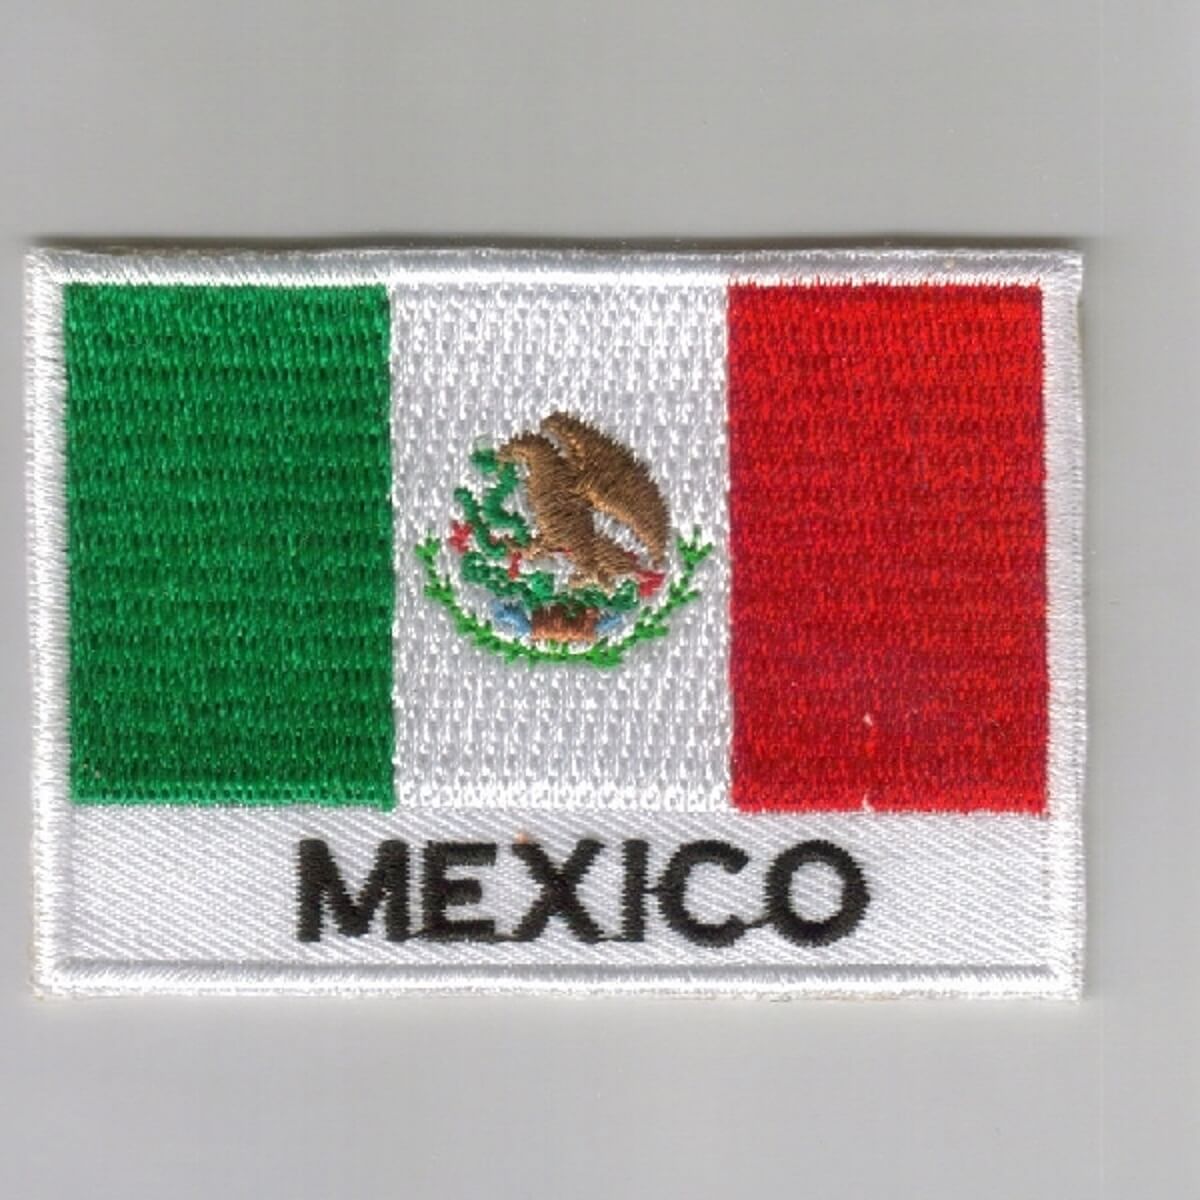 Mexico embroidered patches - country flag Mexico patches / iron on badges